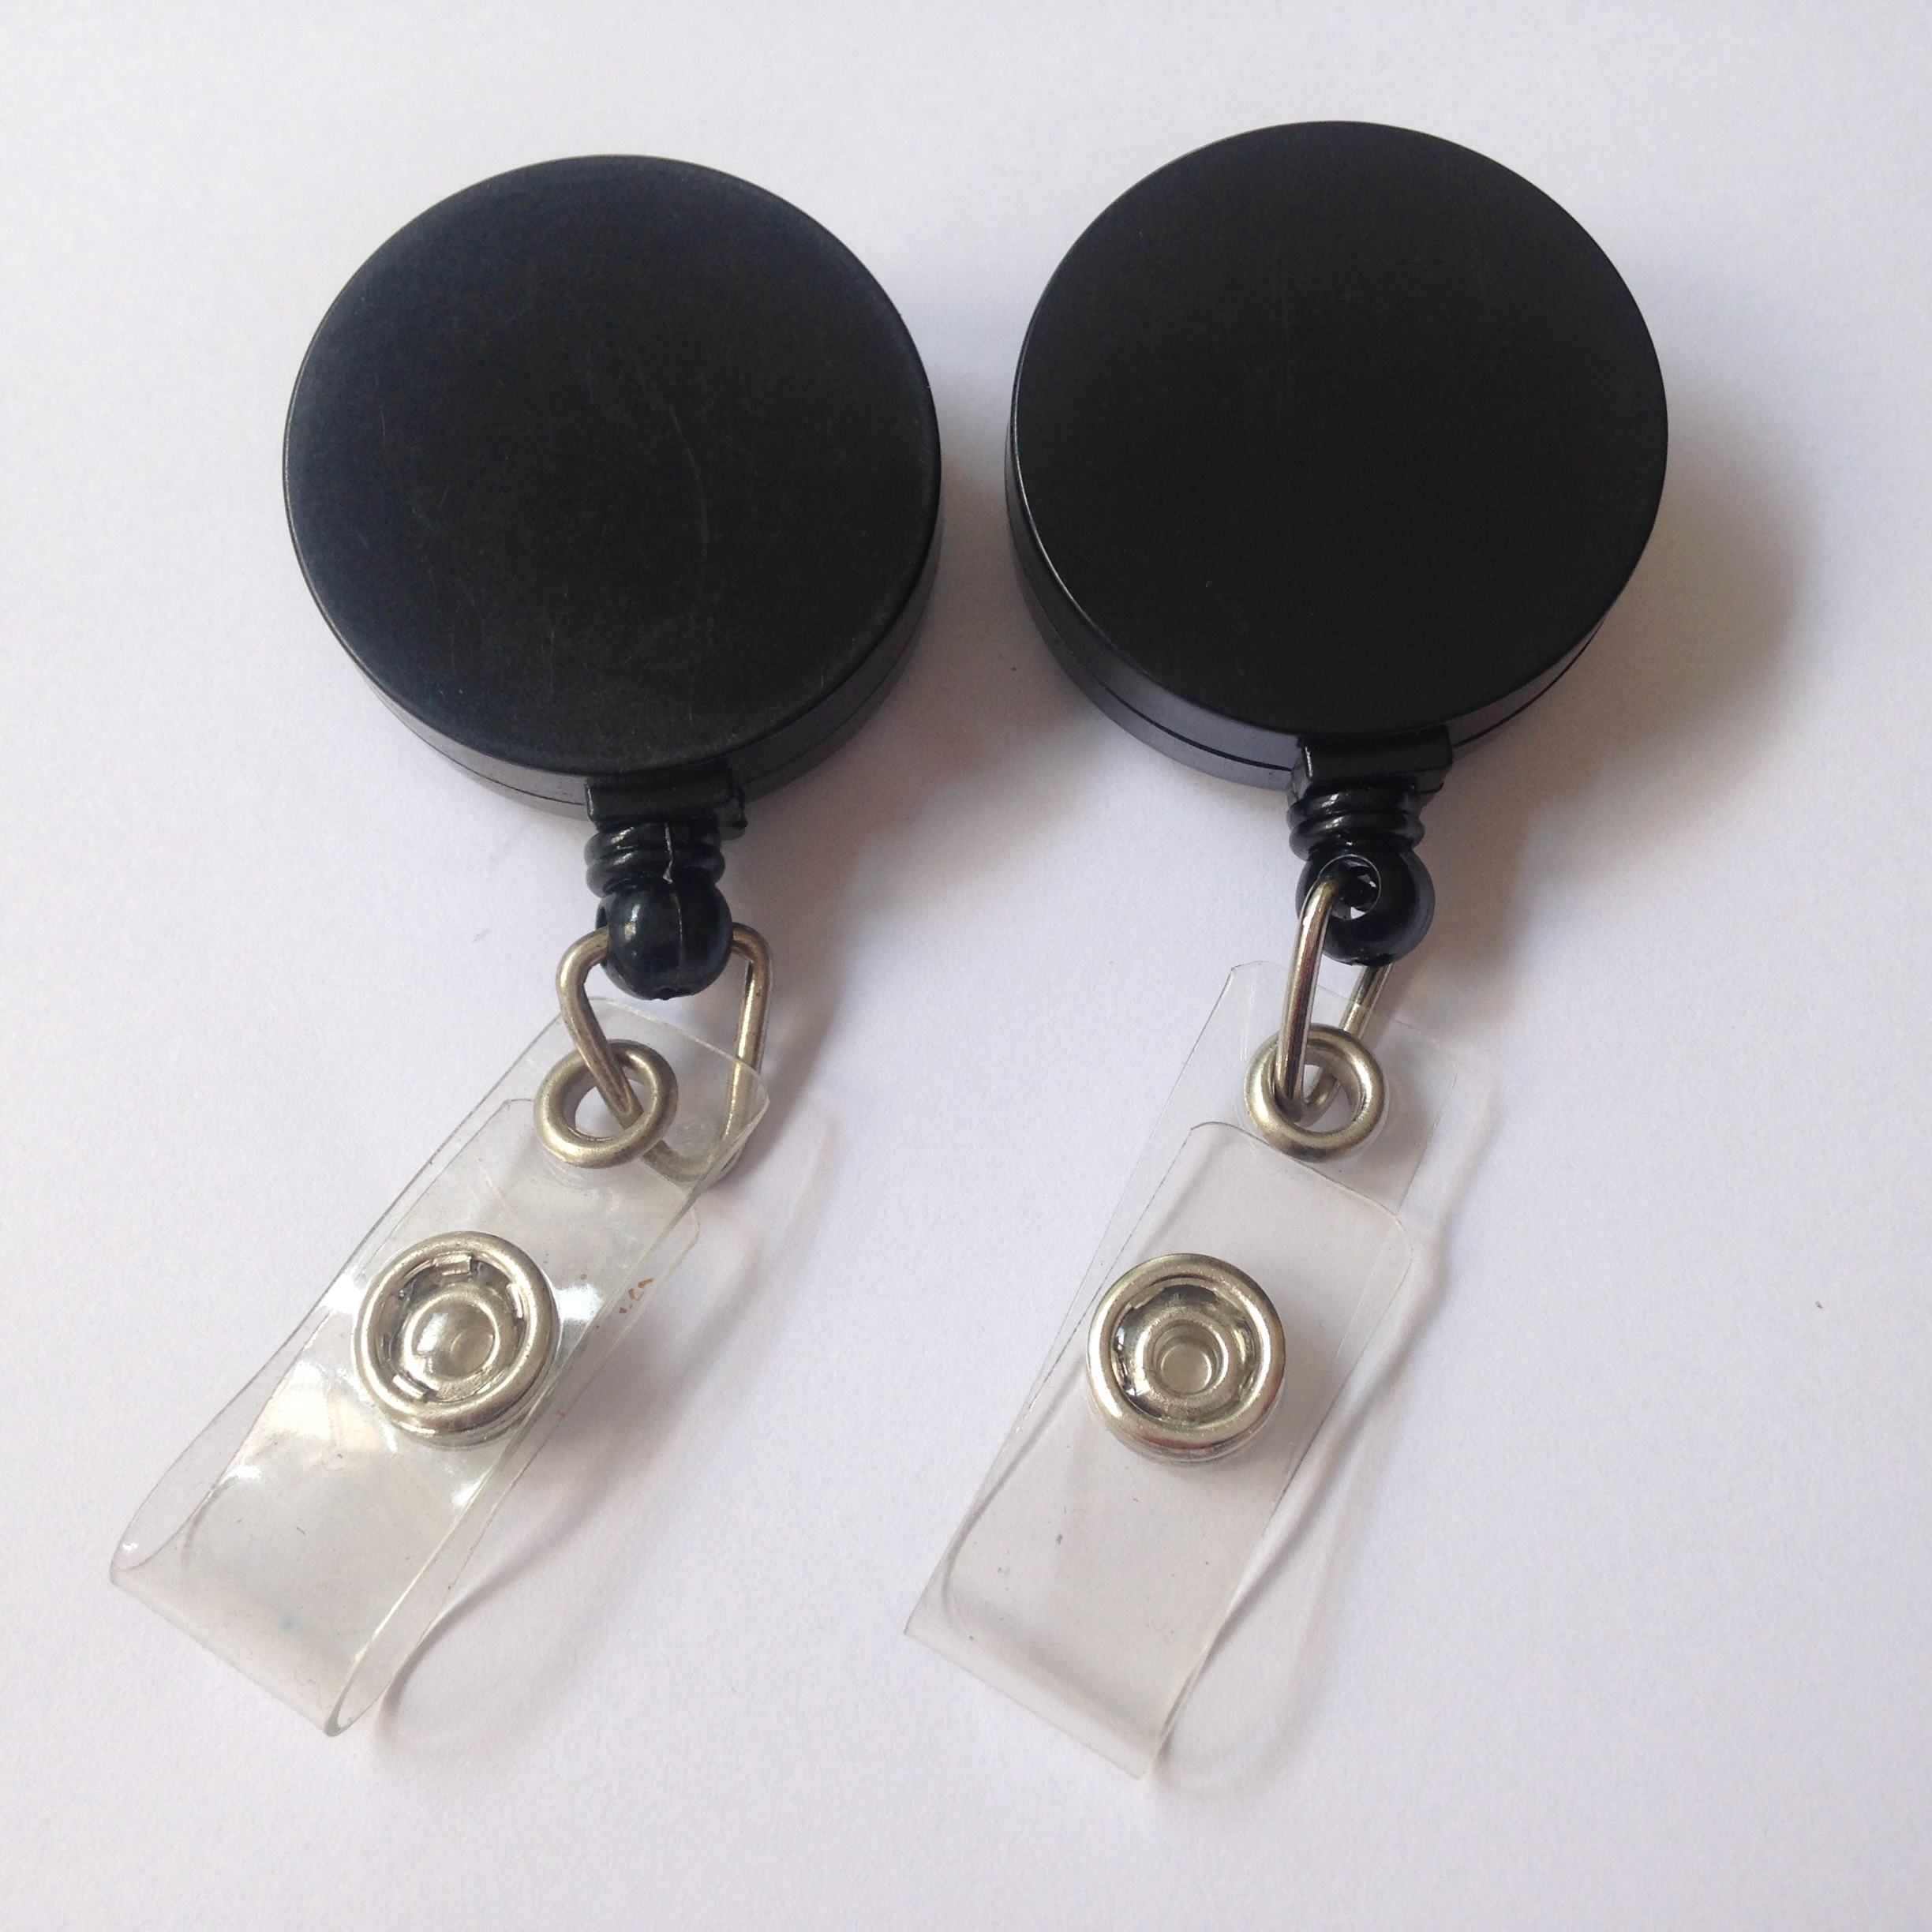 32MM Round Flat ABS Retractable badge holder